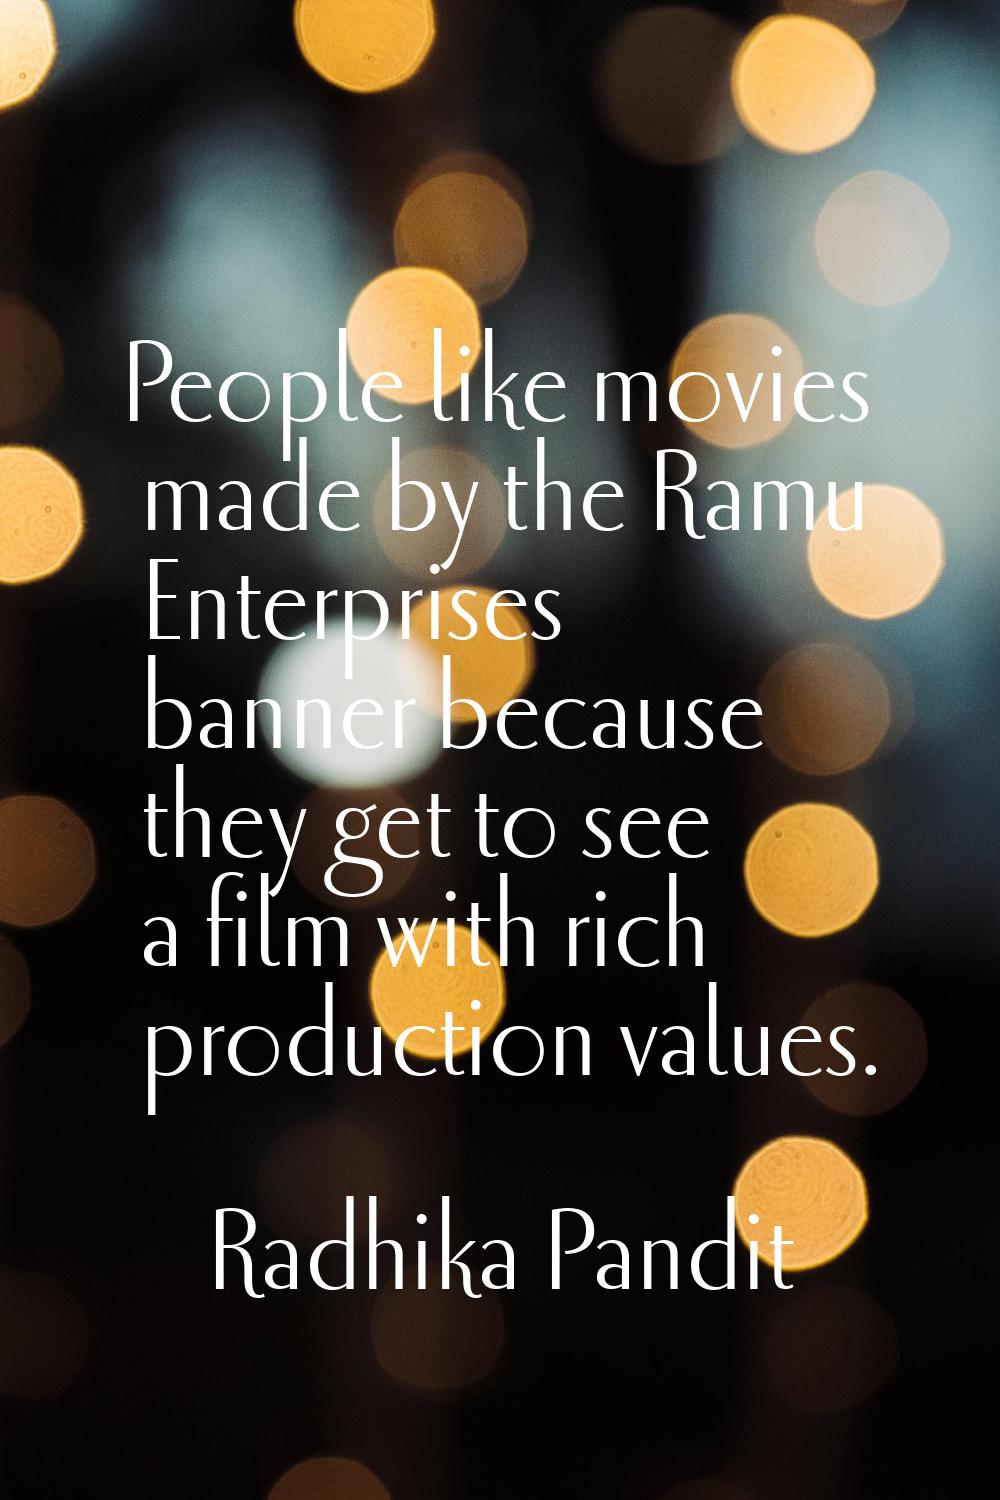 People like movies made by the Ramu Enterprises banner because they get to see a film with rich pro